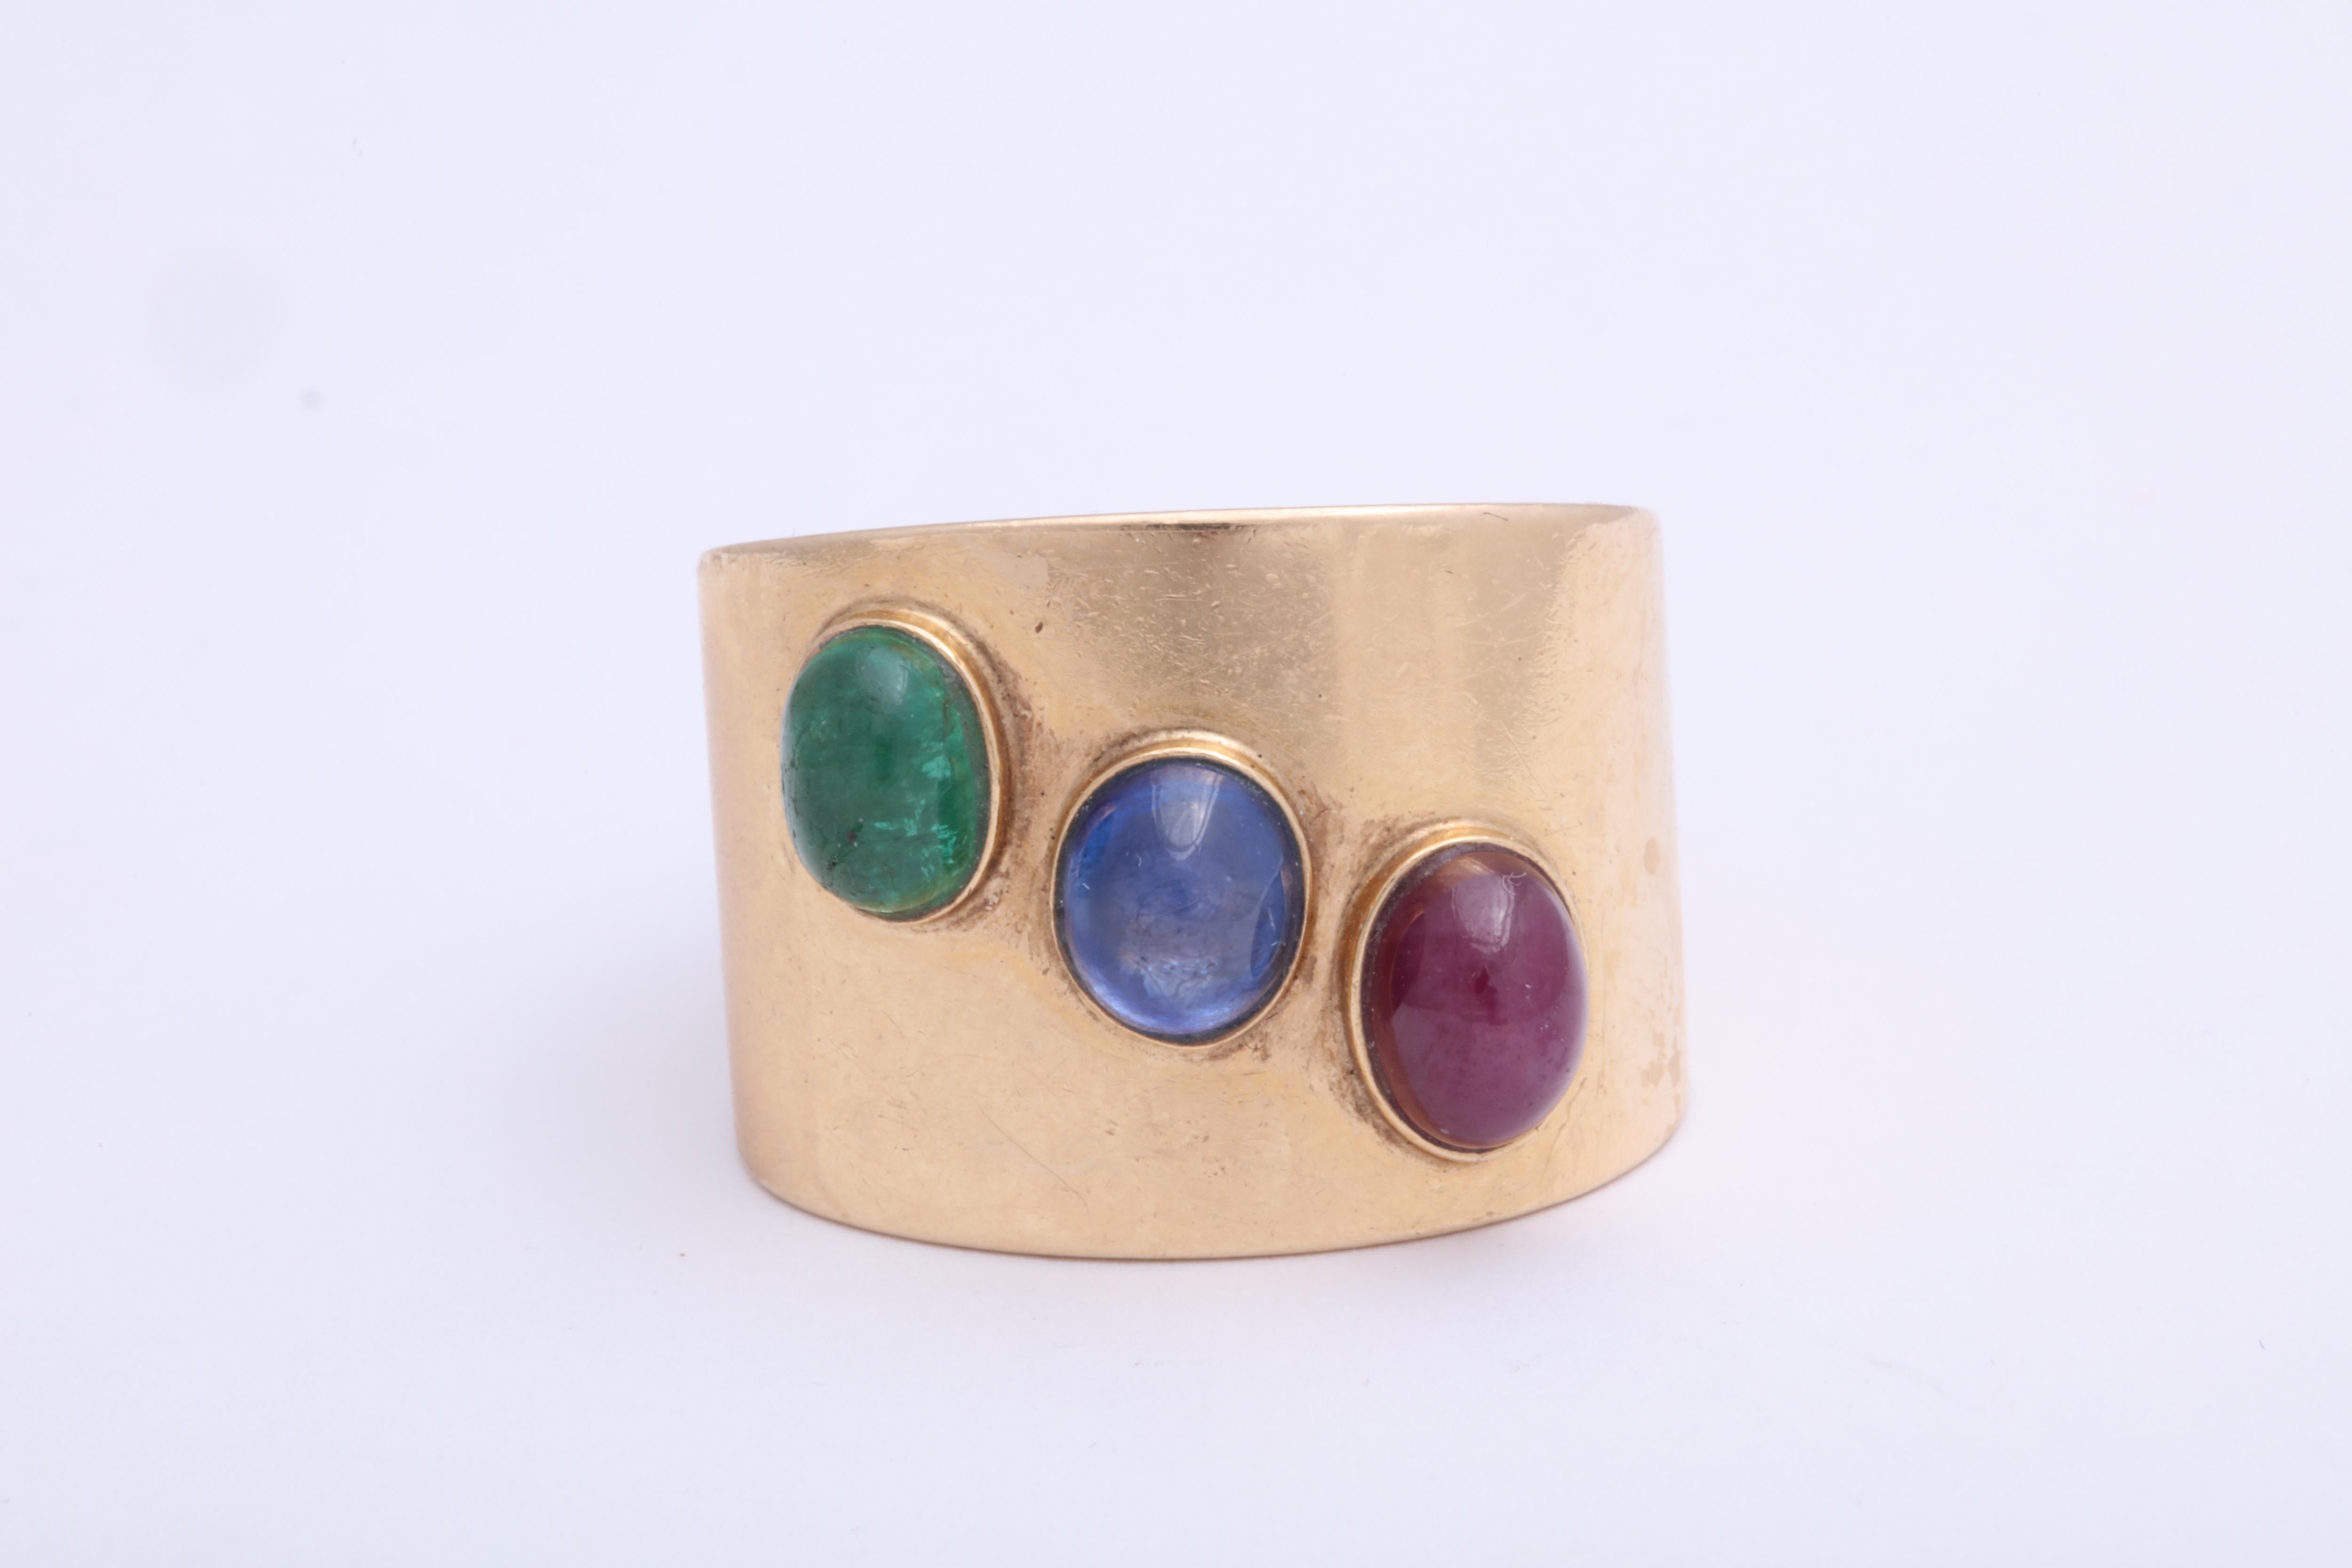 14Kt Wide Band with Cabochon Ruby , Sapphire =, and Emerald Ring - Oist Retro - Ca 1950.  Very high style.  Certainly a ring that will be noticed and make a statement. Size 5 1/2 but could be made larger or perfect for a pinky.